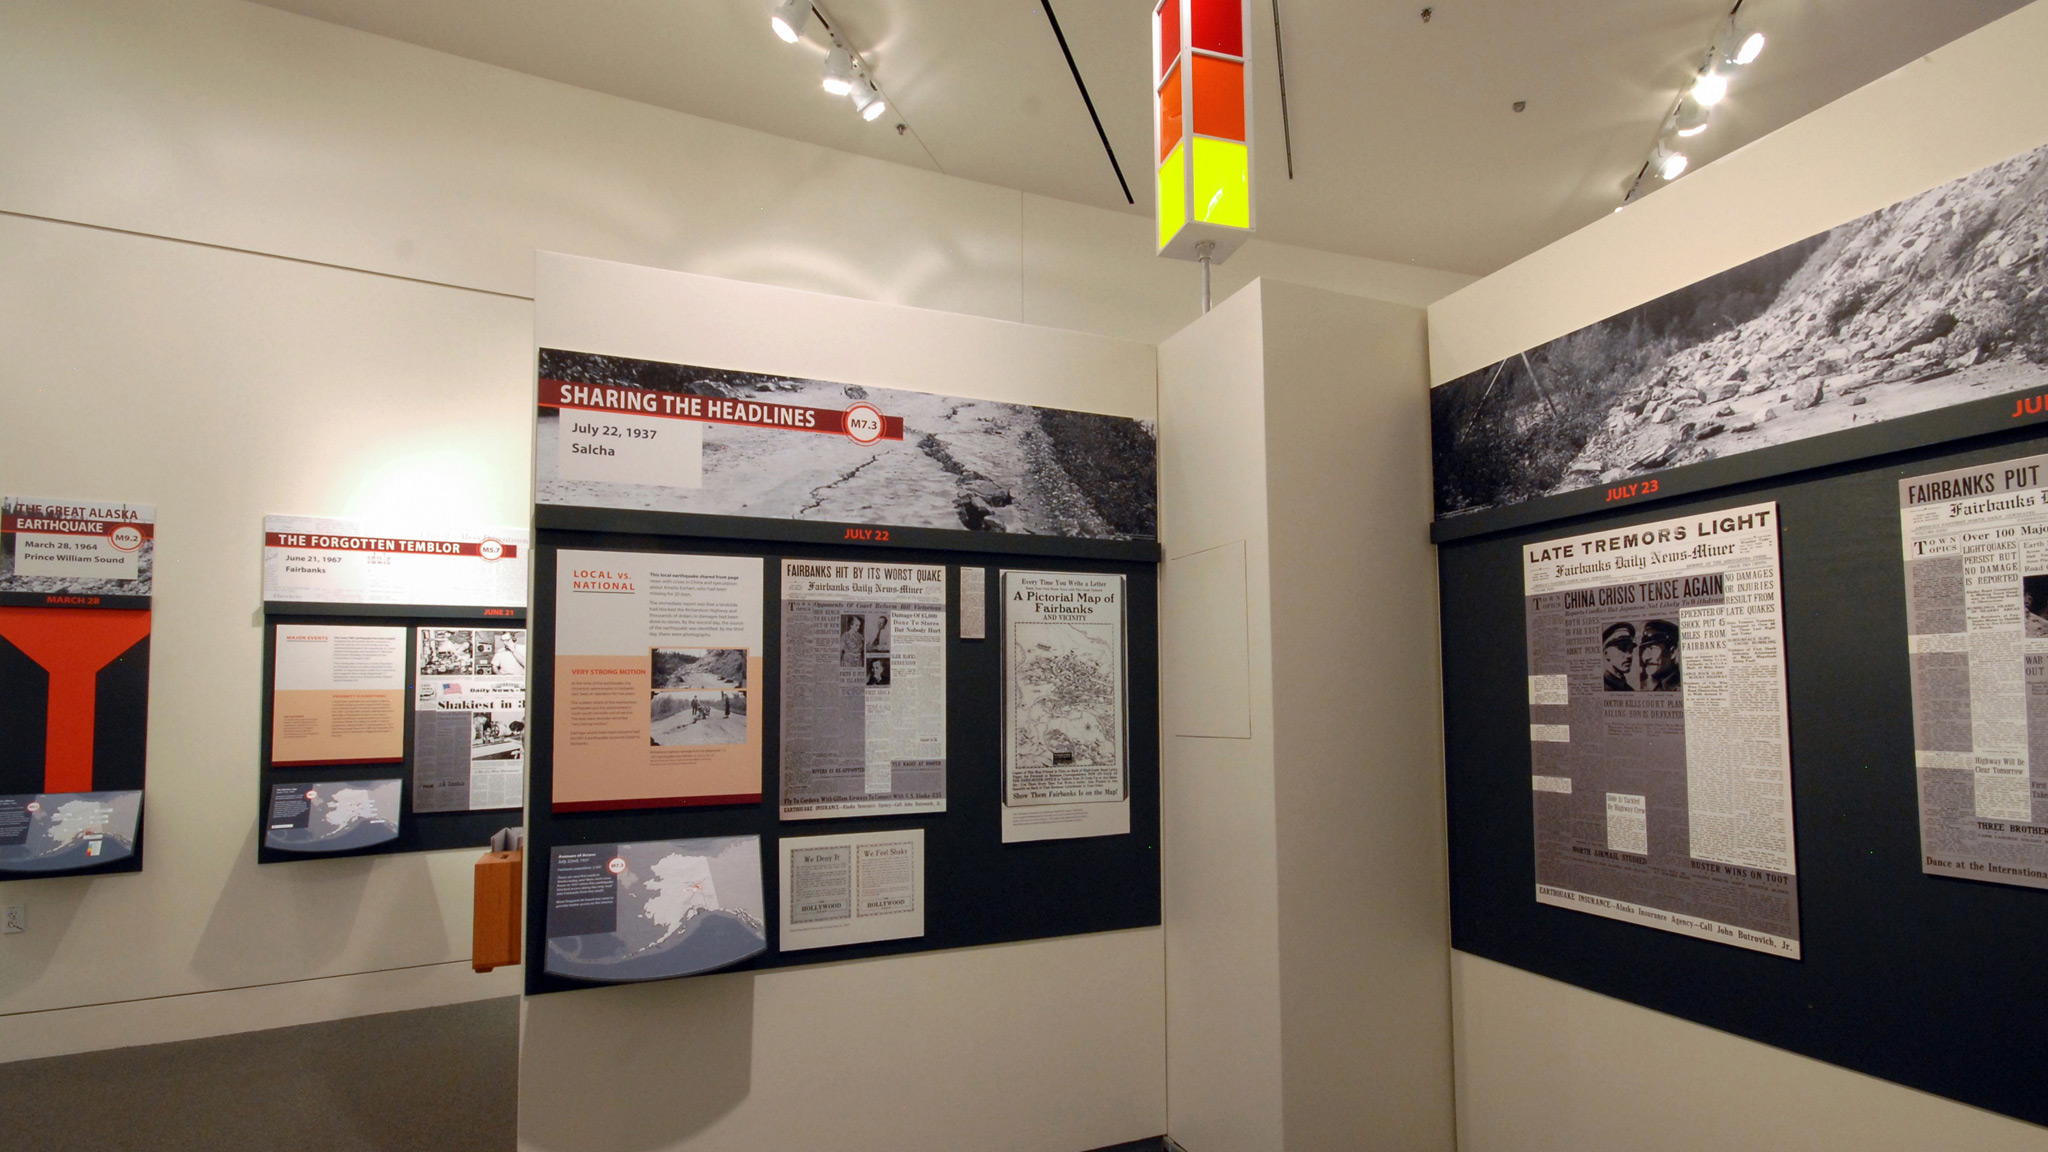 Looking at the exhibit for the 1937 earthquake event. The yellow light on the tower indicates a minor earthquake event somewhere in Alaska within the last couple minutes.